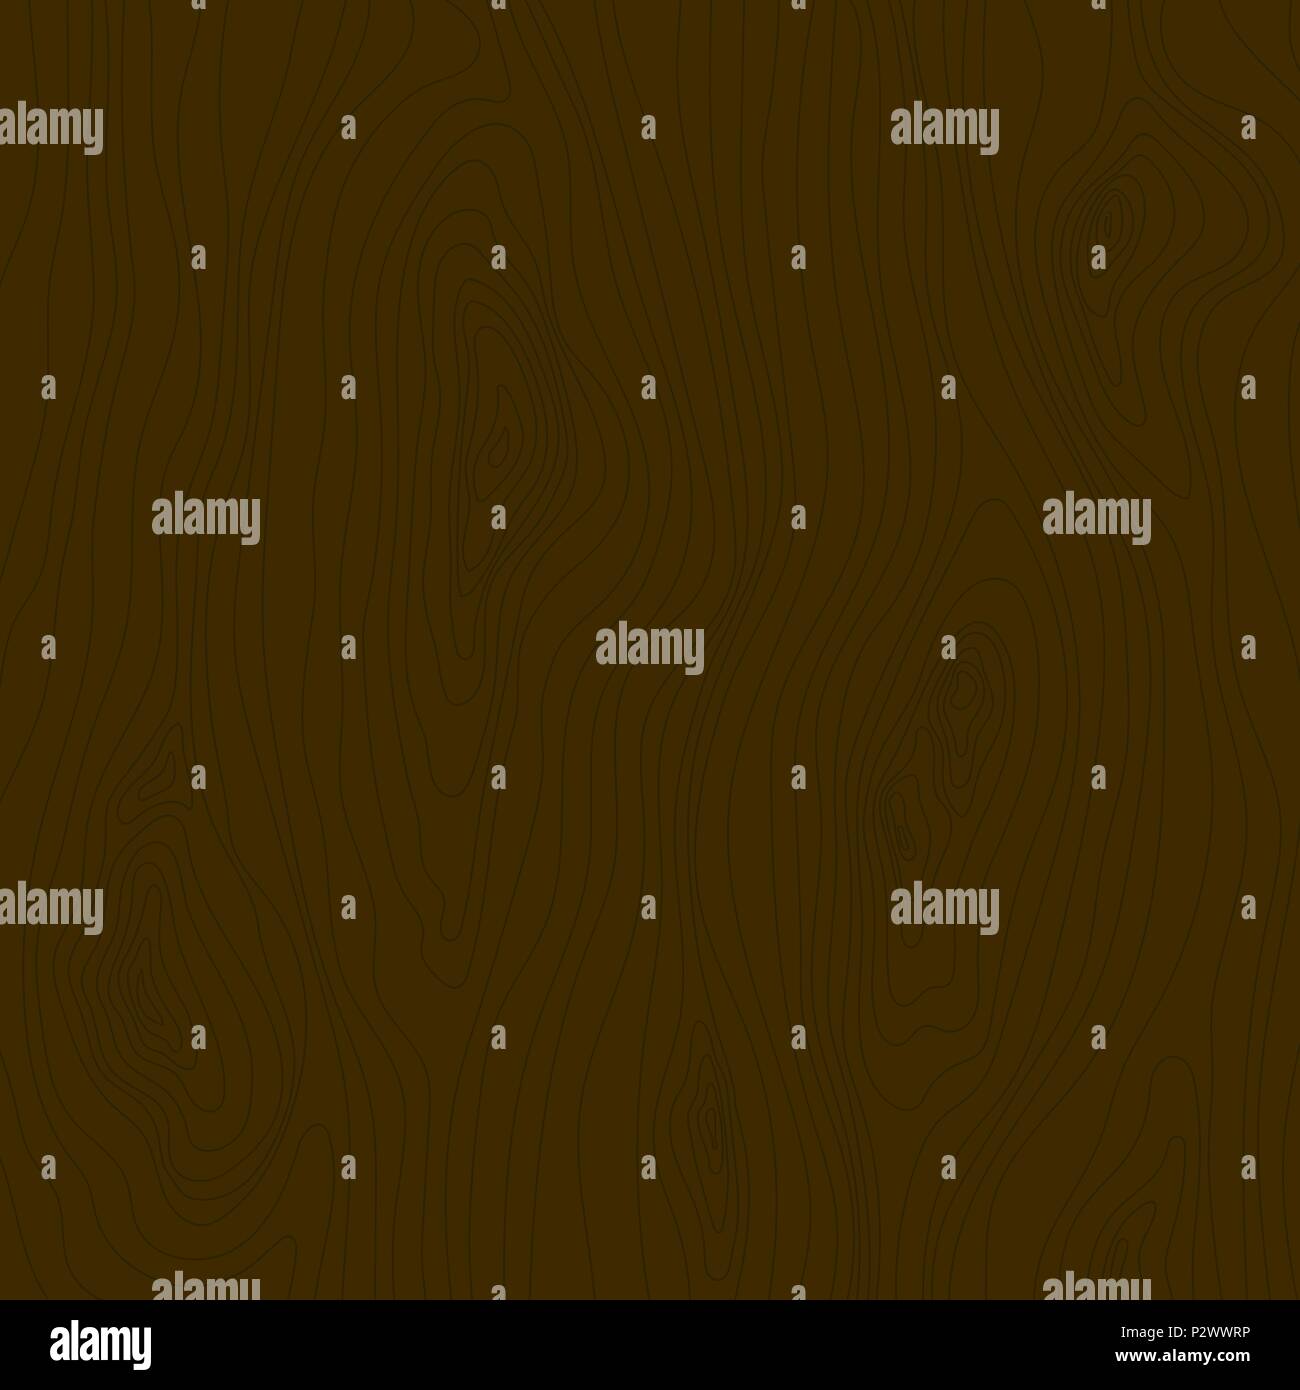 Brown wooden texture. Wood grain pattern. Abstract fibers structure background, vector illustration Stock Vector